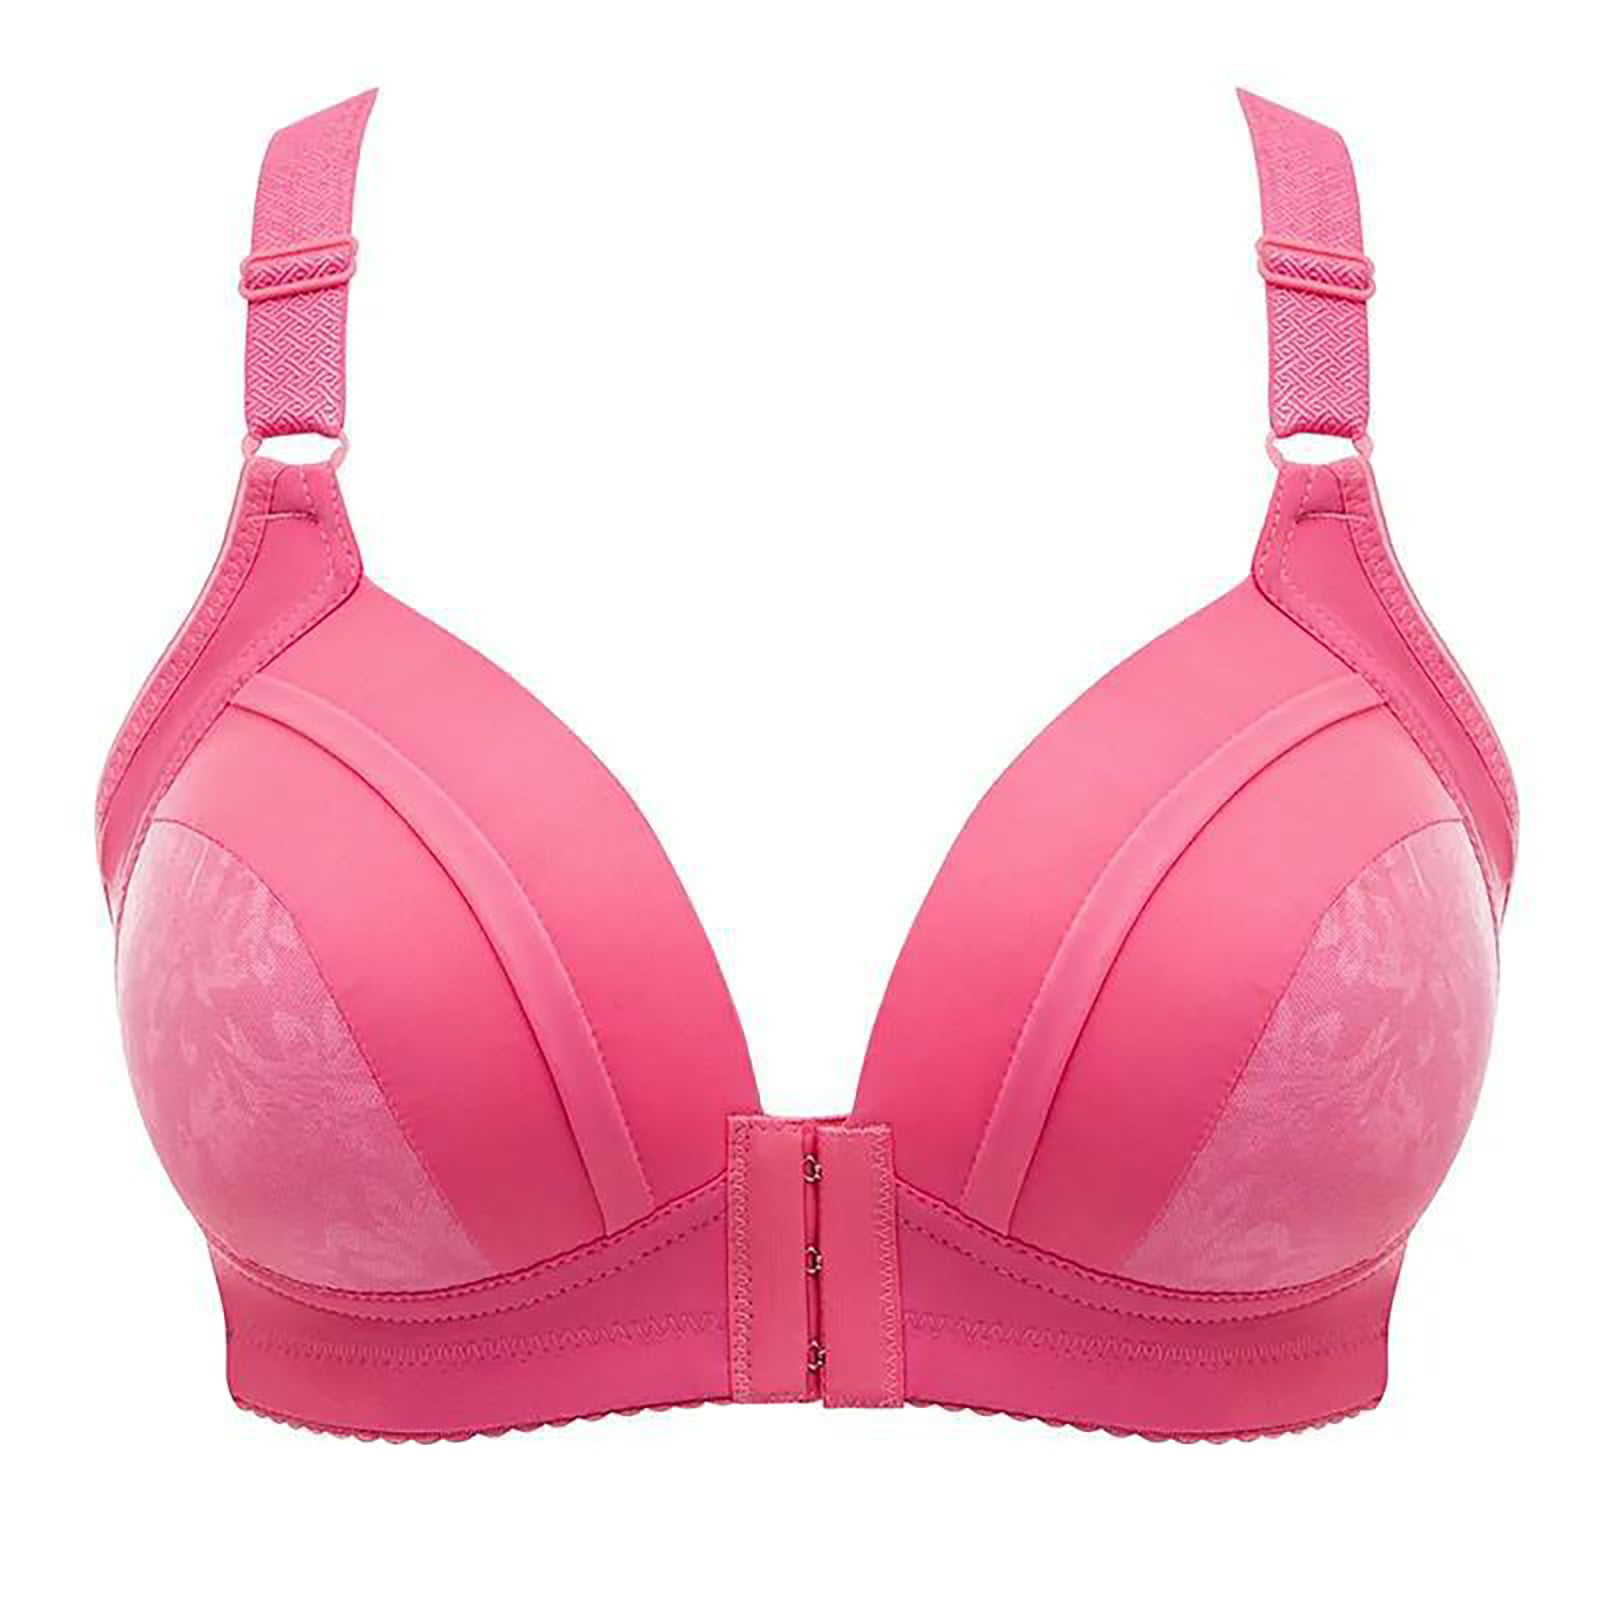 TQWQT Women's Bra with Padded Straps Front Closure Bras